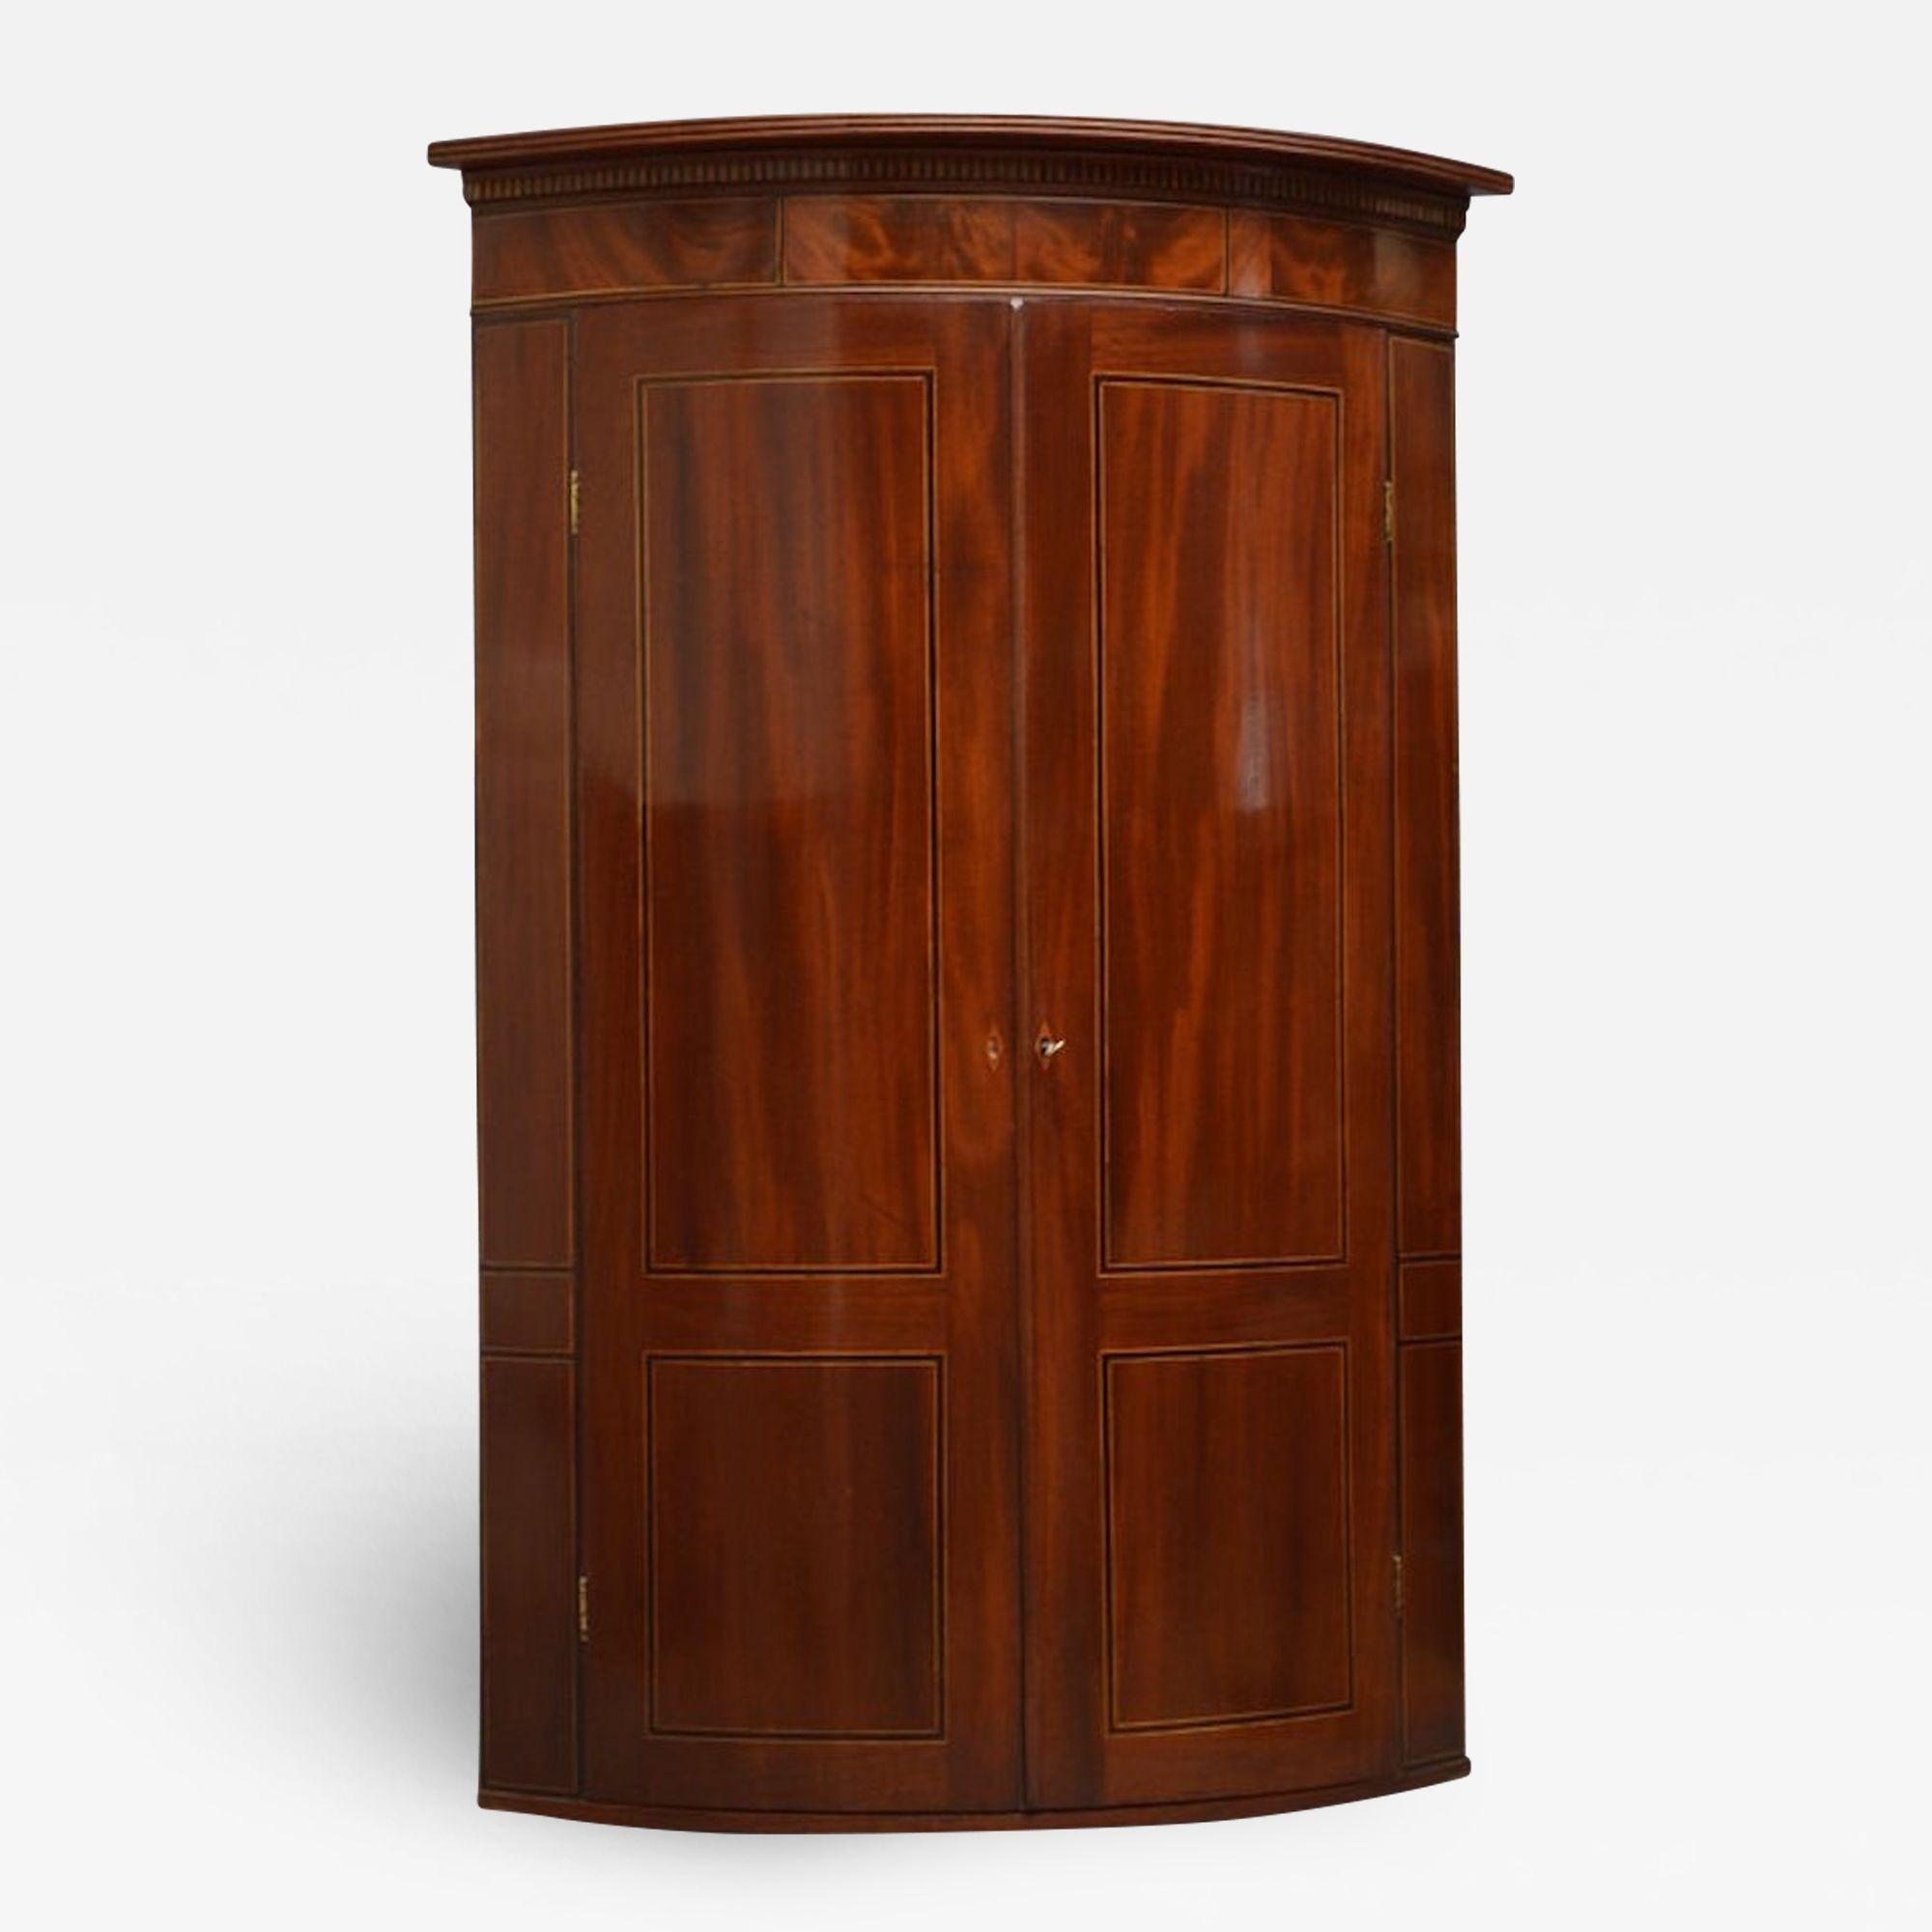 Sn3065 Fine example of Georgian, mahogany bowfronted corner cupboard, having reeded cornice with inlaid dentil decoration above string inlaid flamed mahogany frieze and a pair of ebony and satinwood string inlaid doors, enclosing 2 shelves and spice